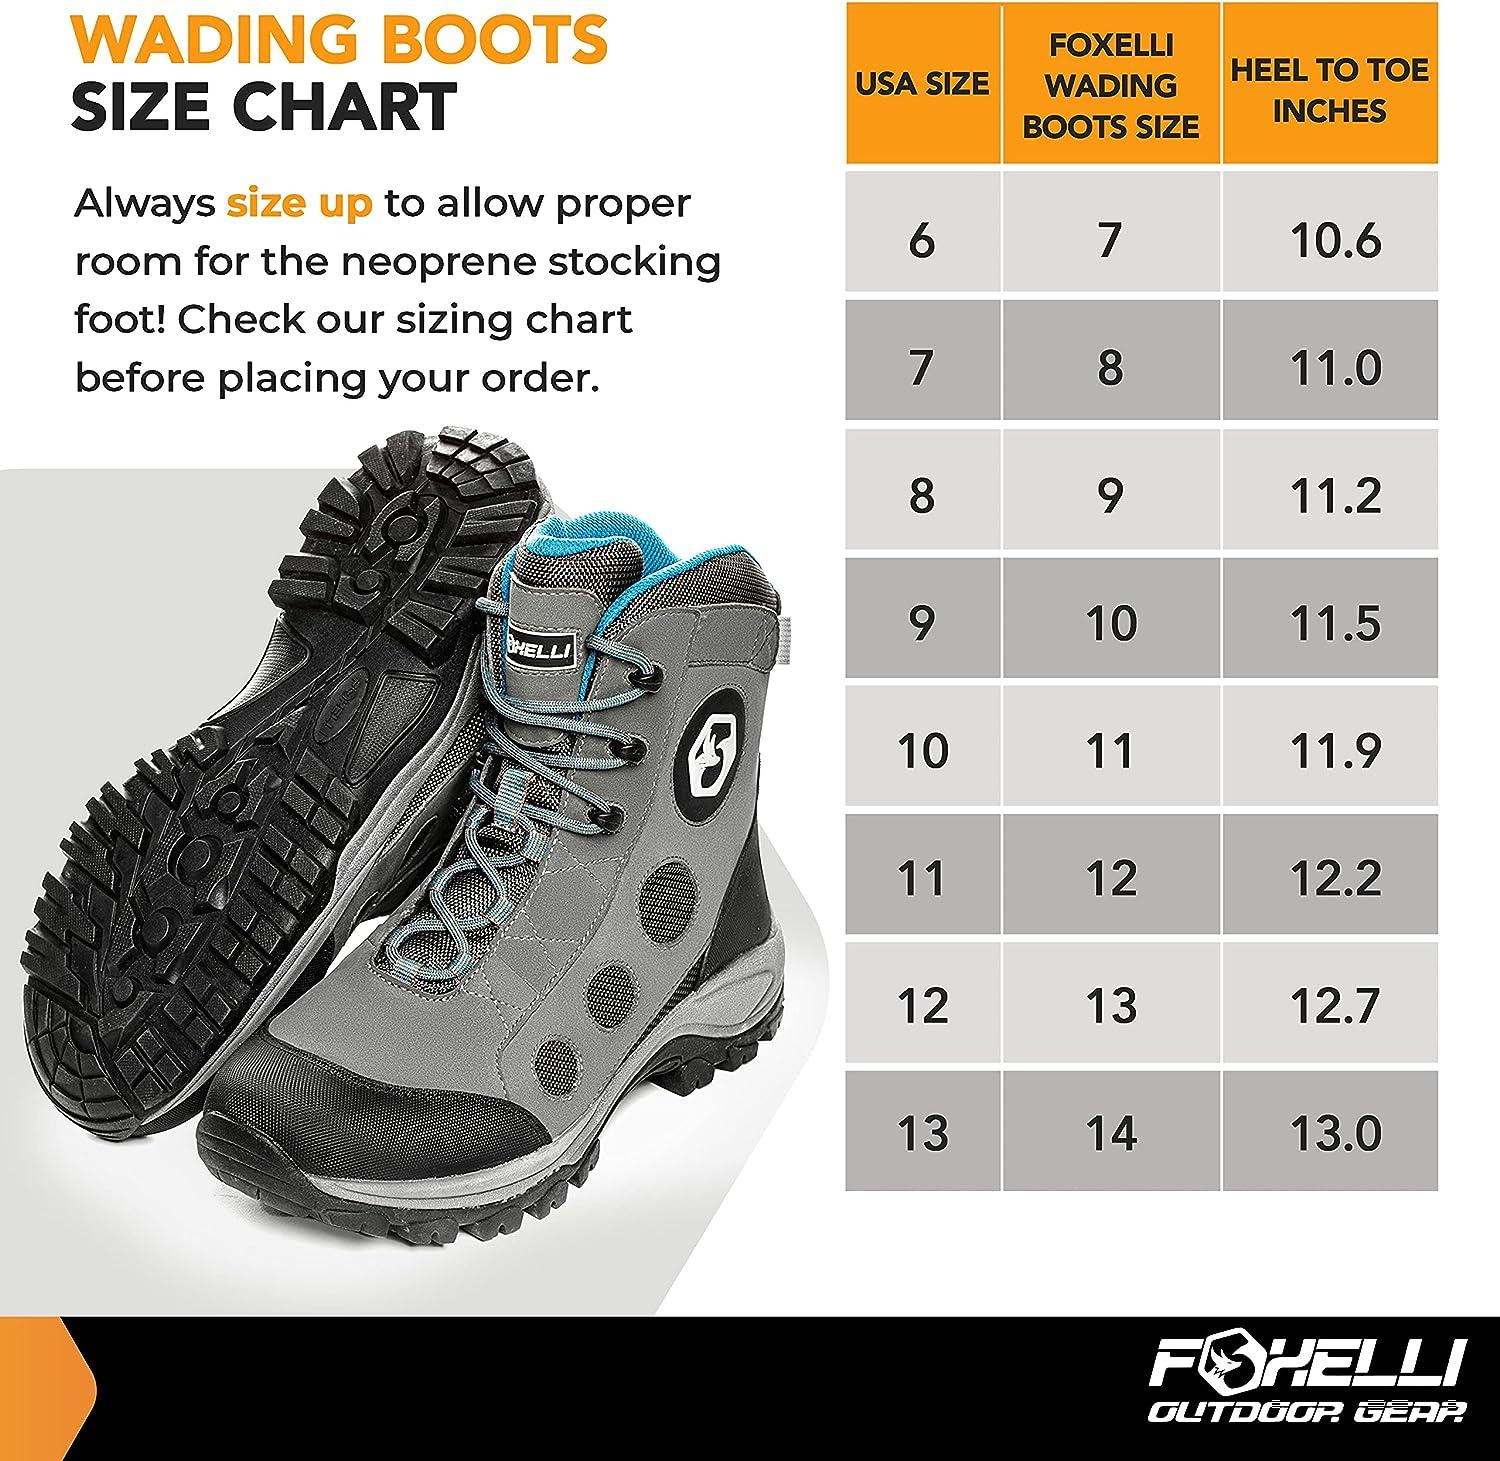 Foxelli Wading Boots Lightweight Wading Boots for Men, Rubber Sole Wading  Shoes, Fly Fishing Boots Grey 14